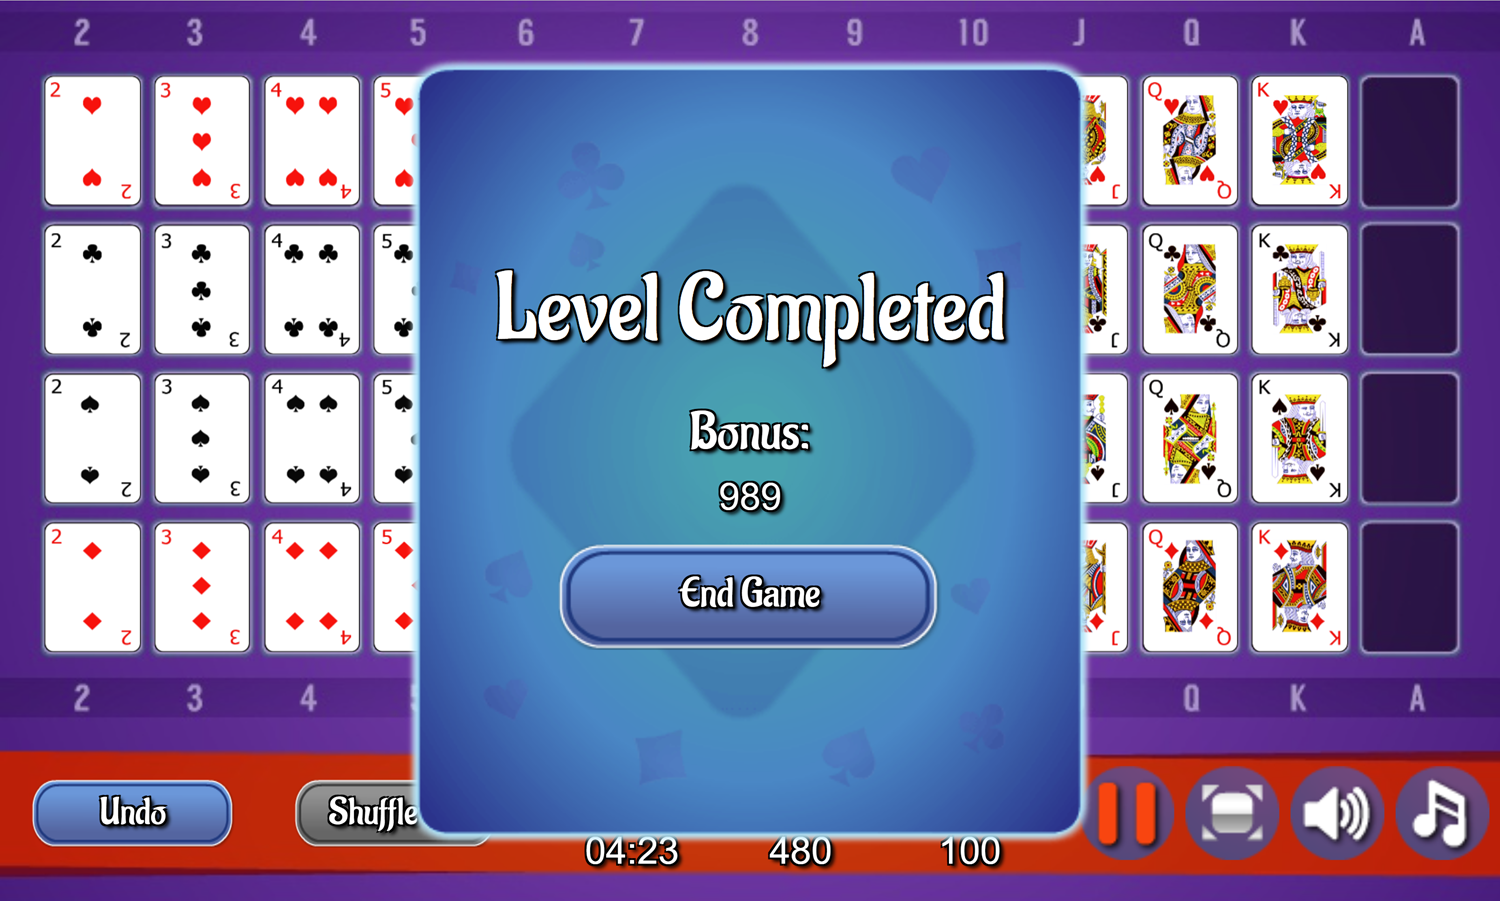 Gaps Solitaire Game Level Completed Screen Screenshot.